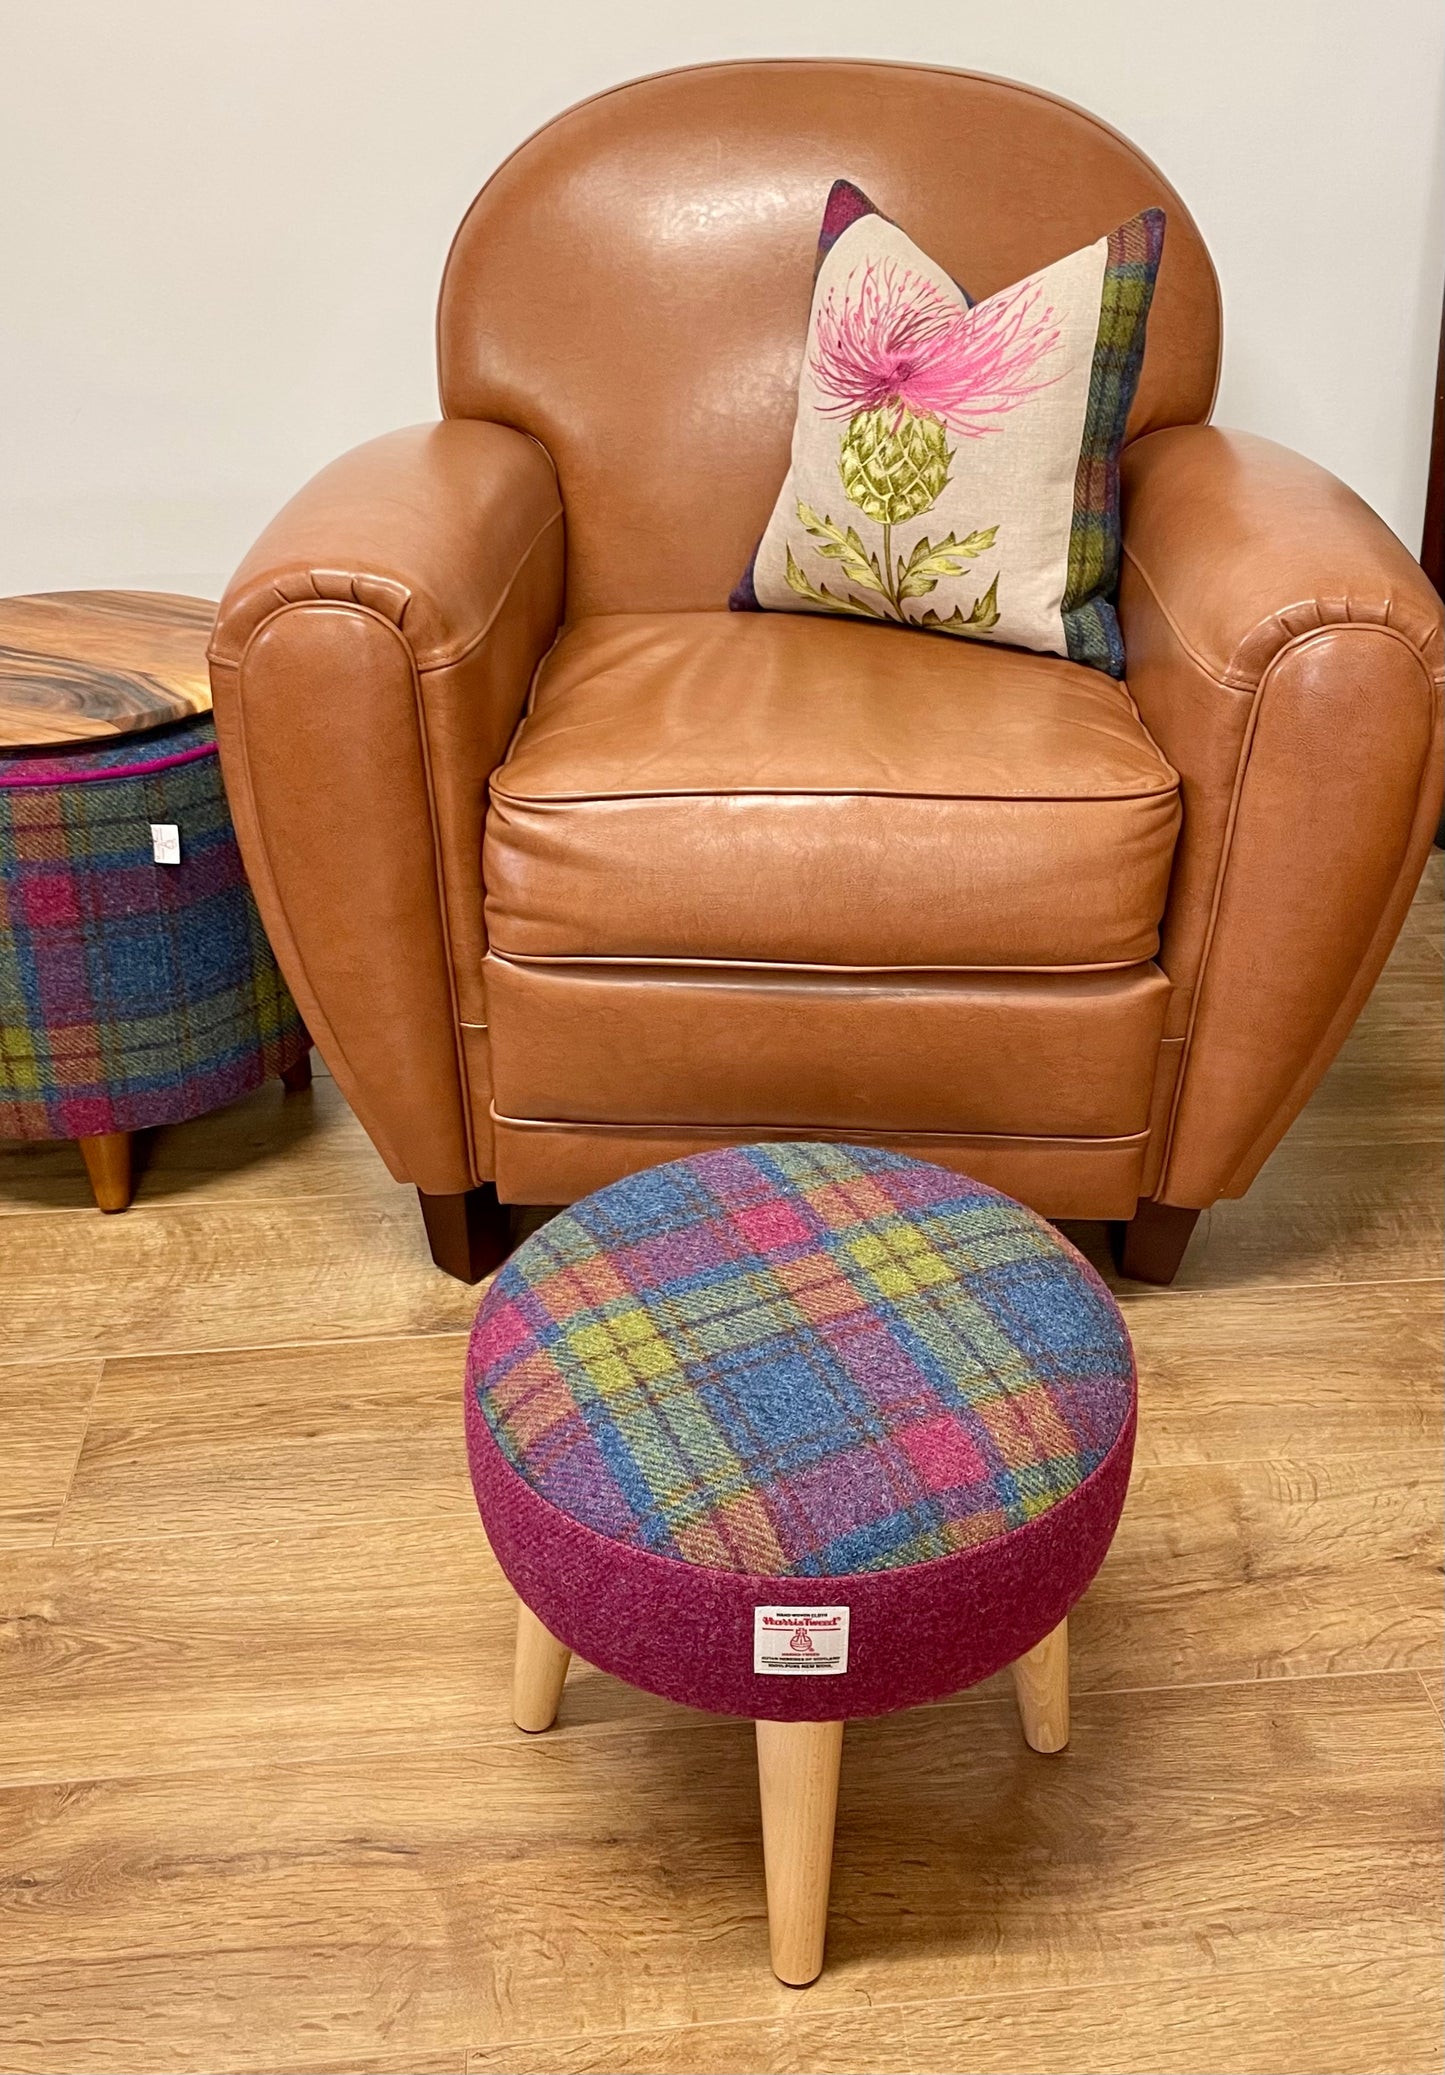 Colourful Tartan Harris Tweed Chunky End Table with Fuchsia Piping and Removable Wooden Top